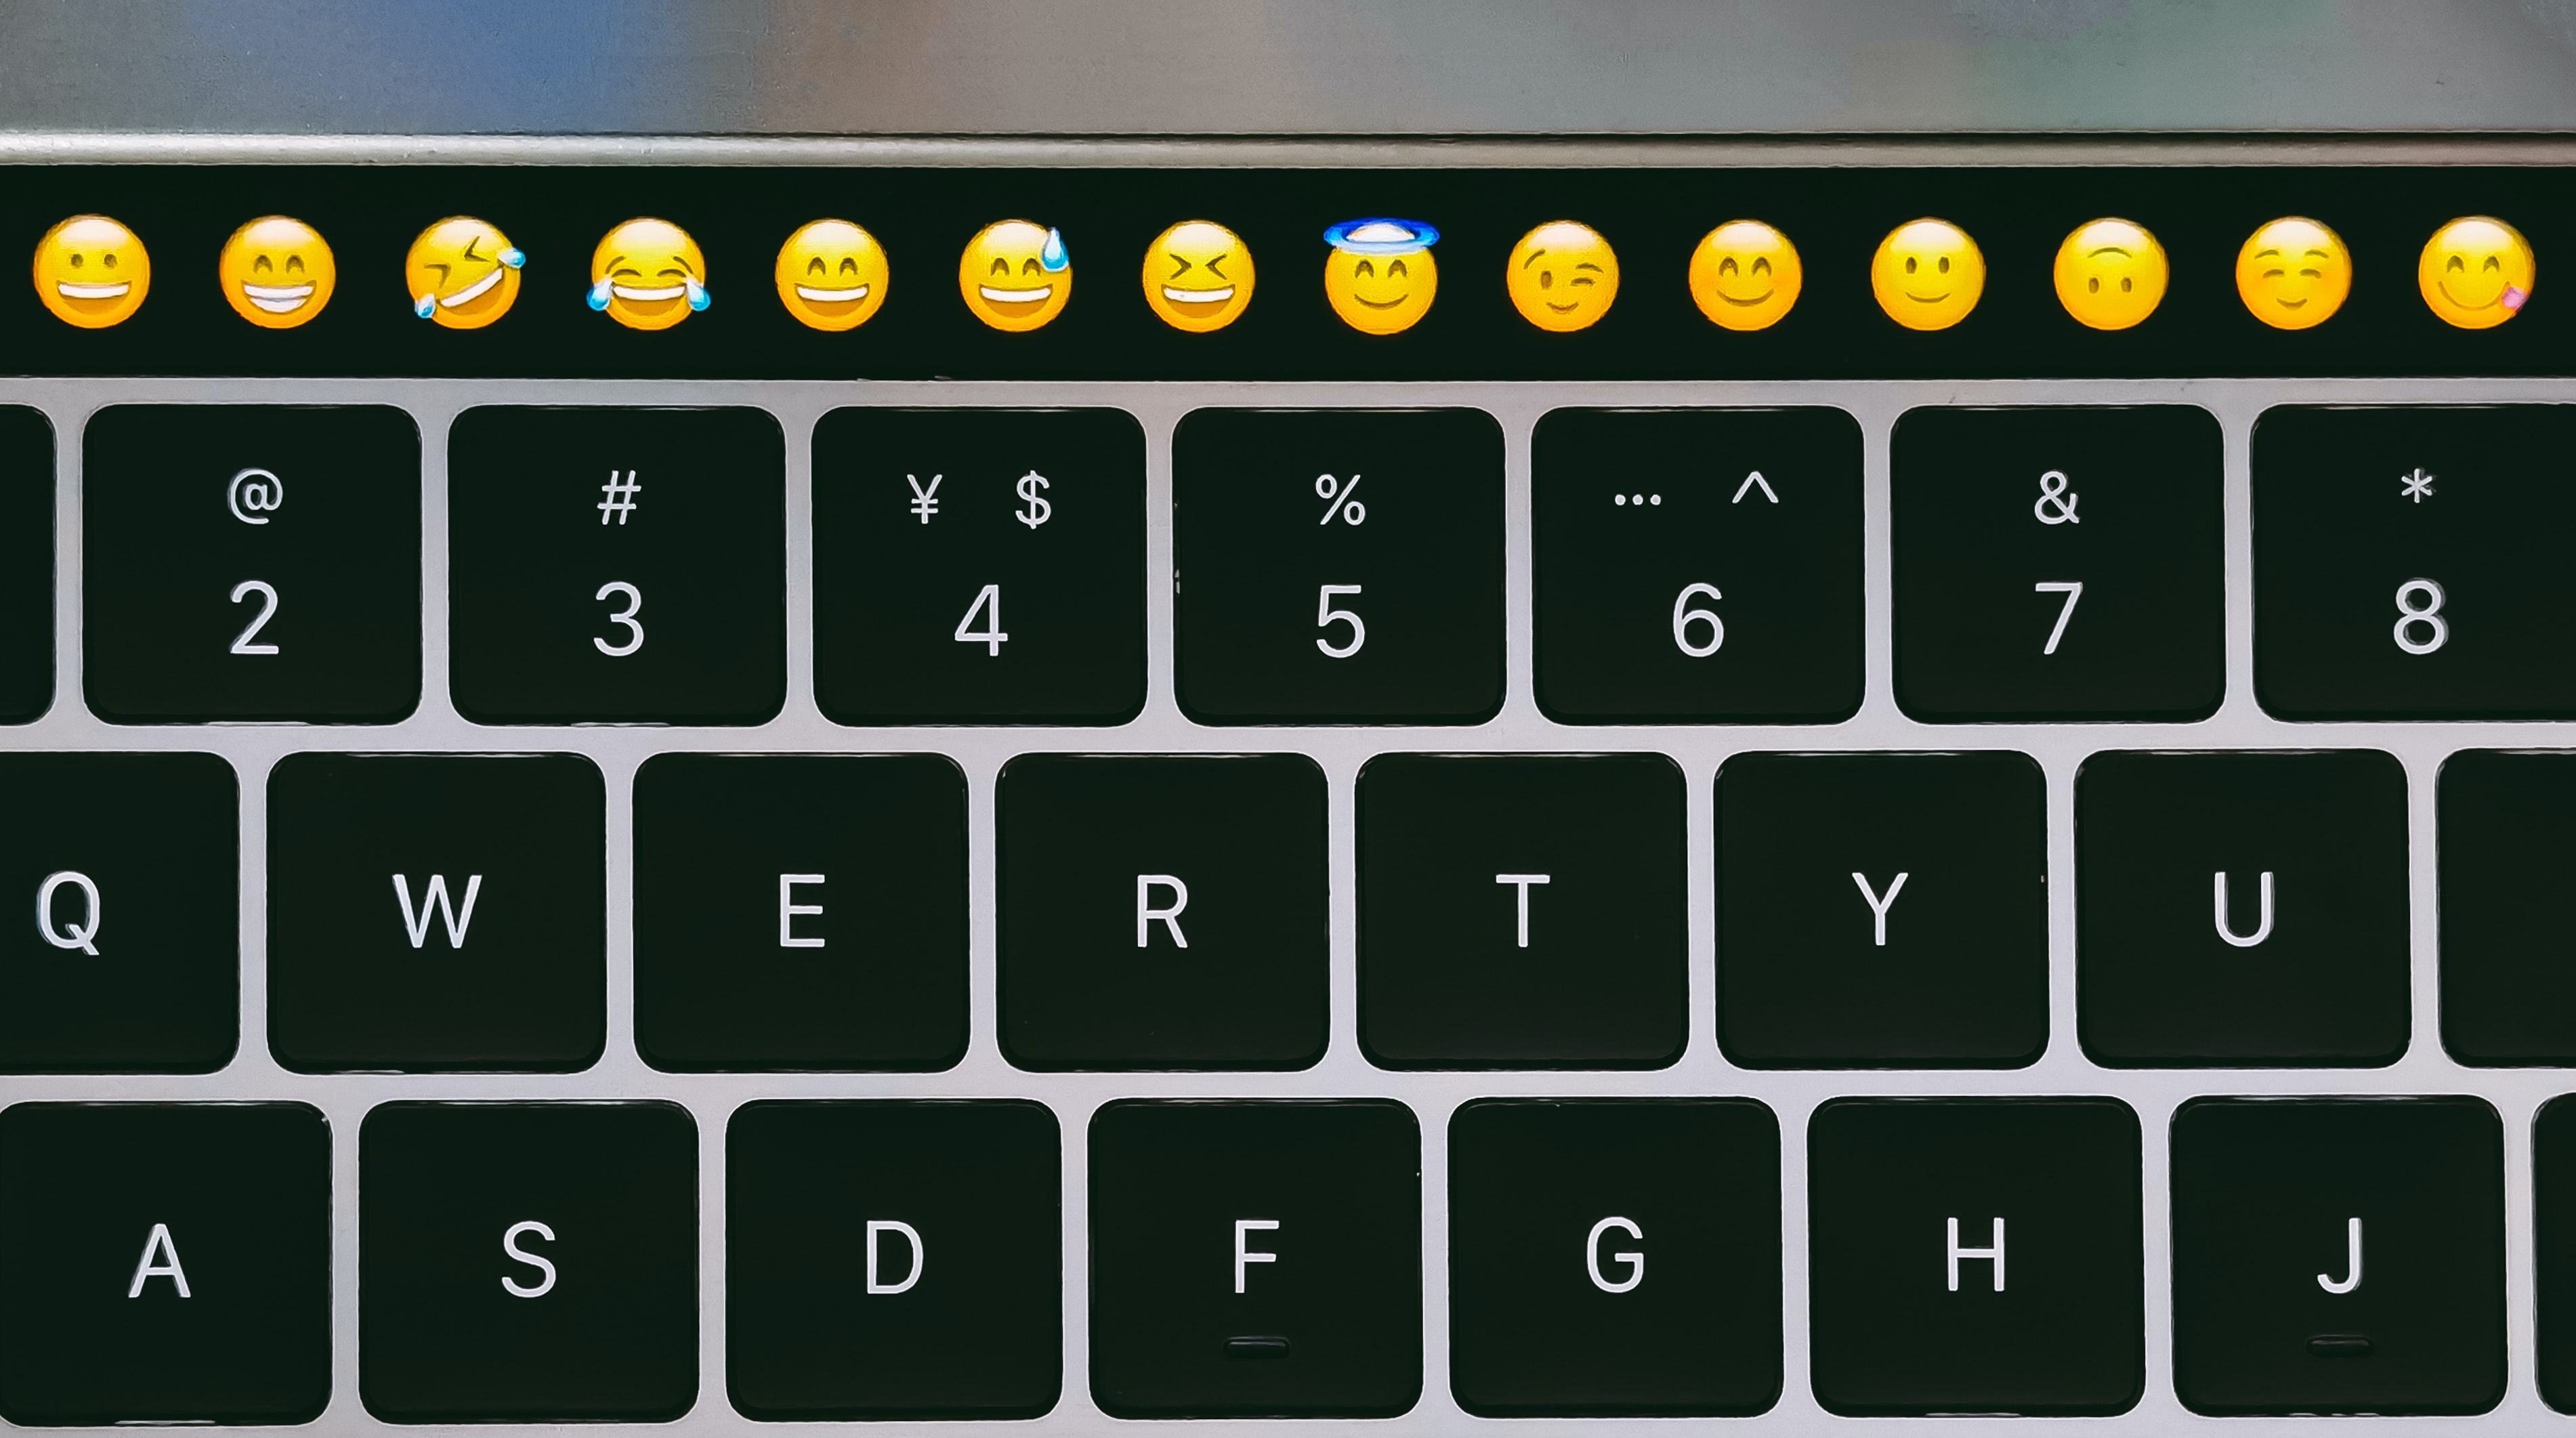 A close-up image of a computer keyboard with emoji buttons